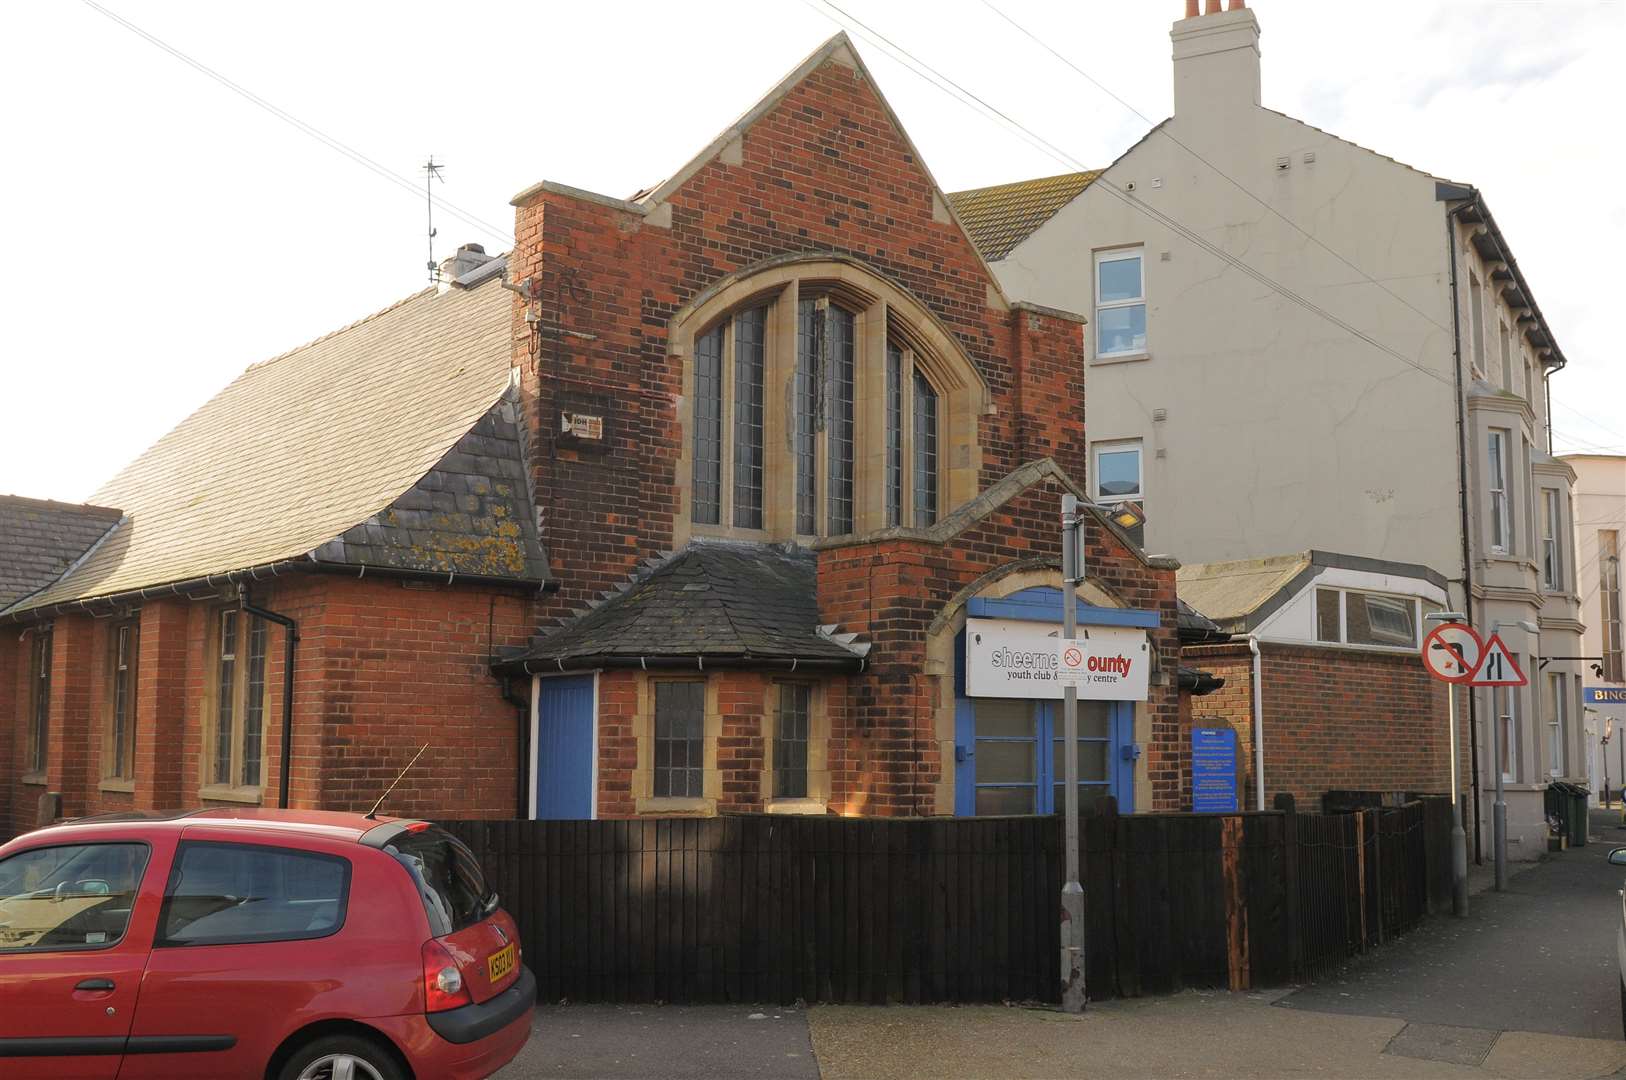 Sheerness County Youth Centre, The Broadway, Sheerness, has been shut until further notice